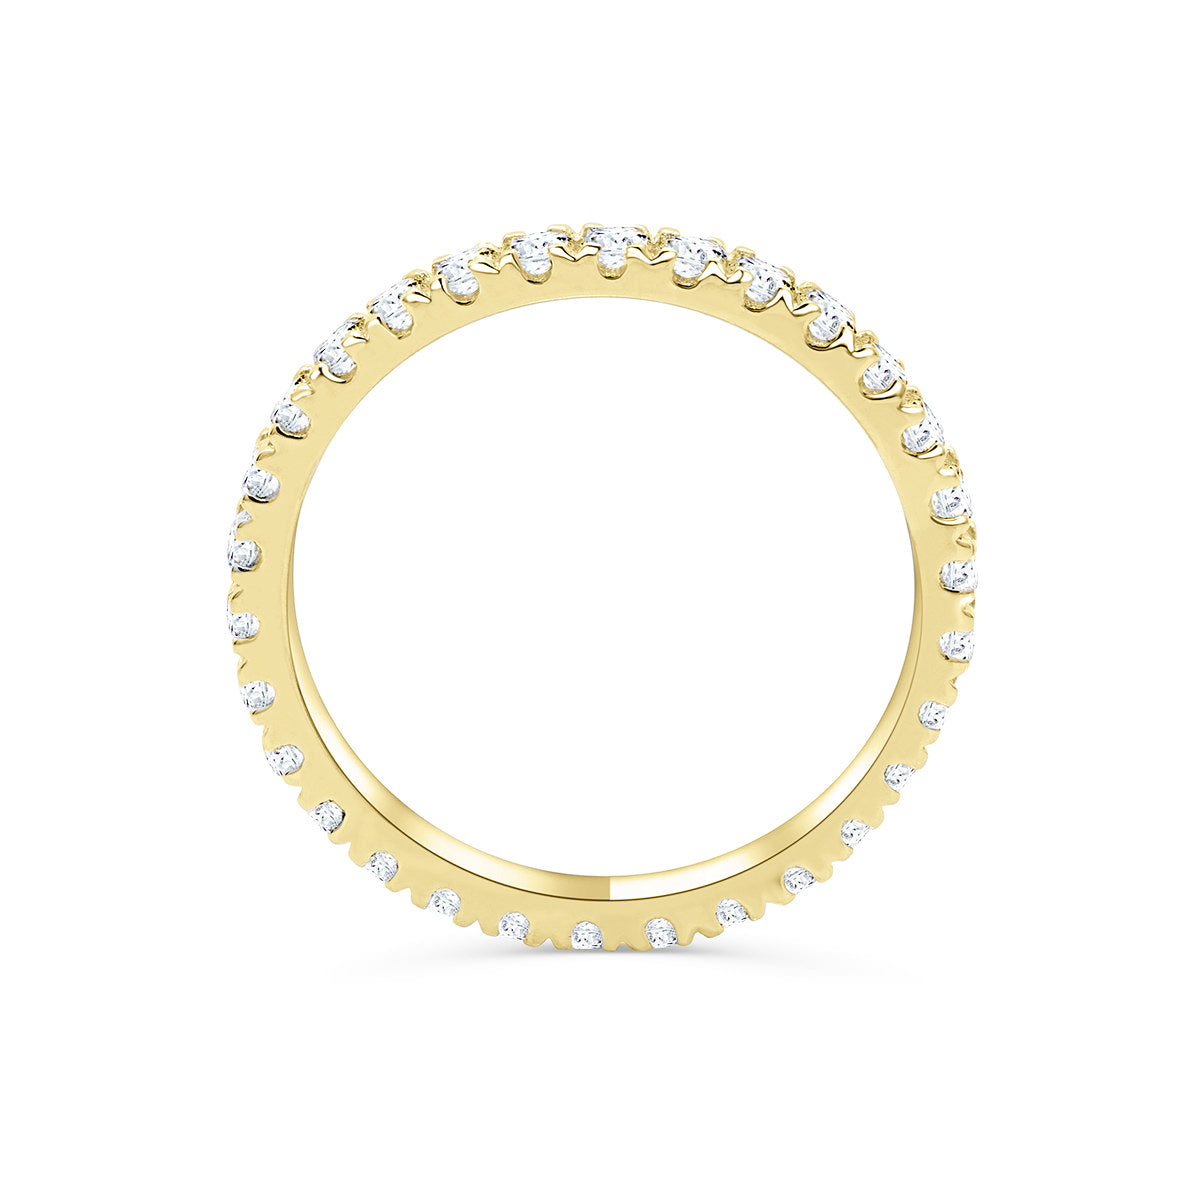 Simple gold classic eternity wedding band